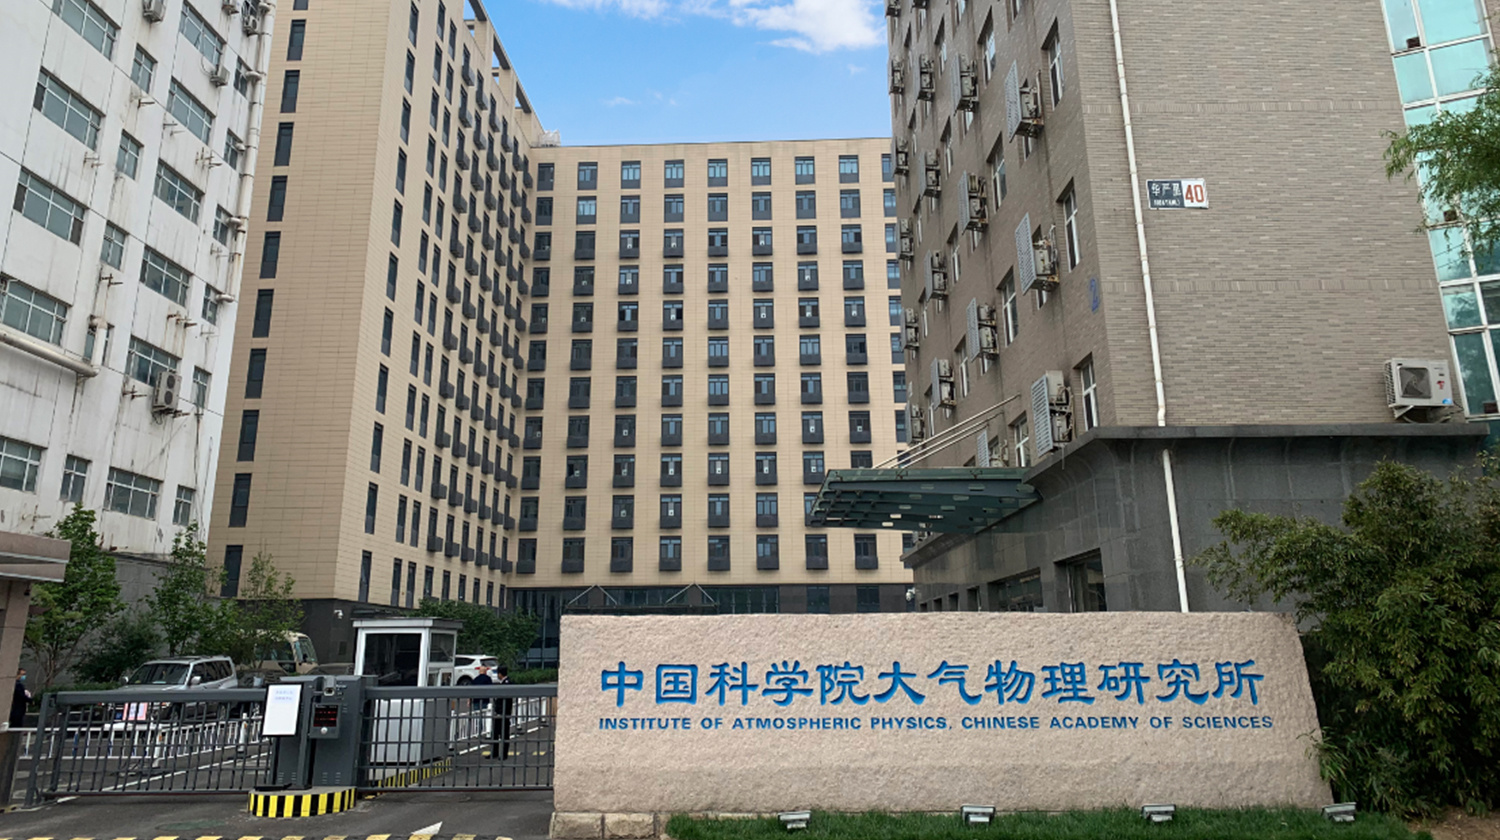 Institute of Atmospheric Physics, Chinese Academy of Sciences